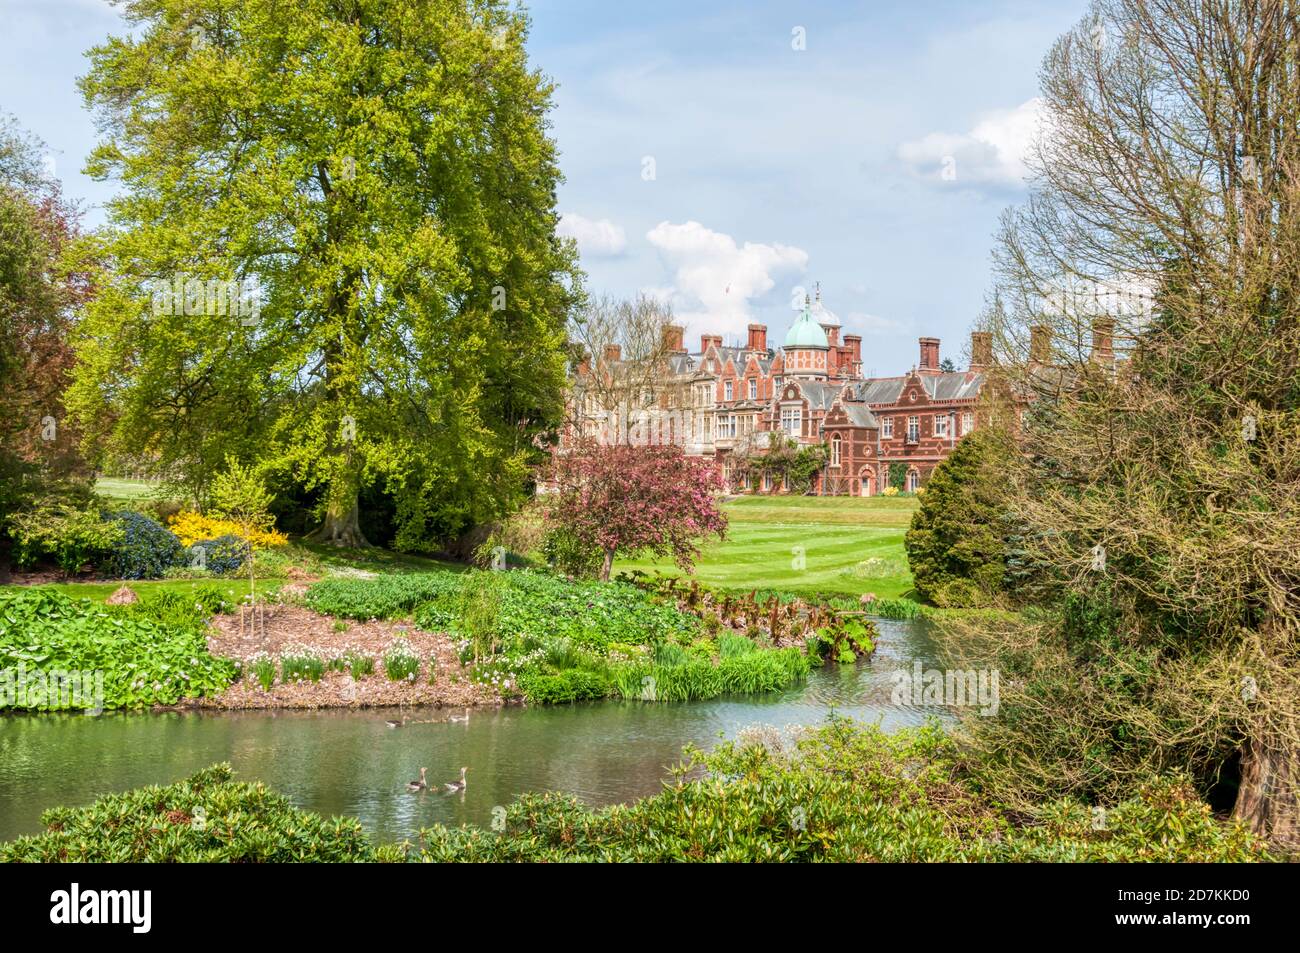 Sandringham House seen across the ornamental gardens and part of the lake in the grounds. Stock Photo